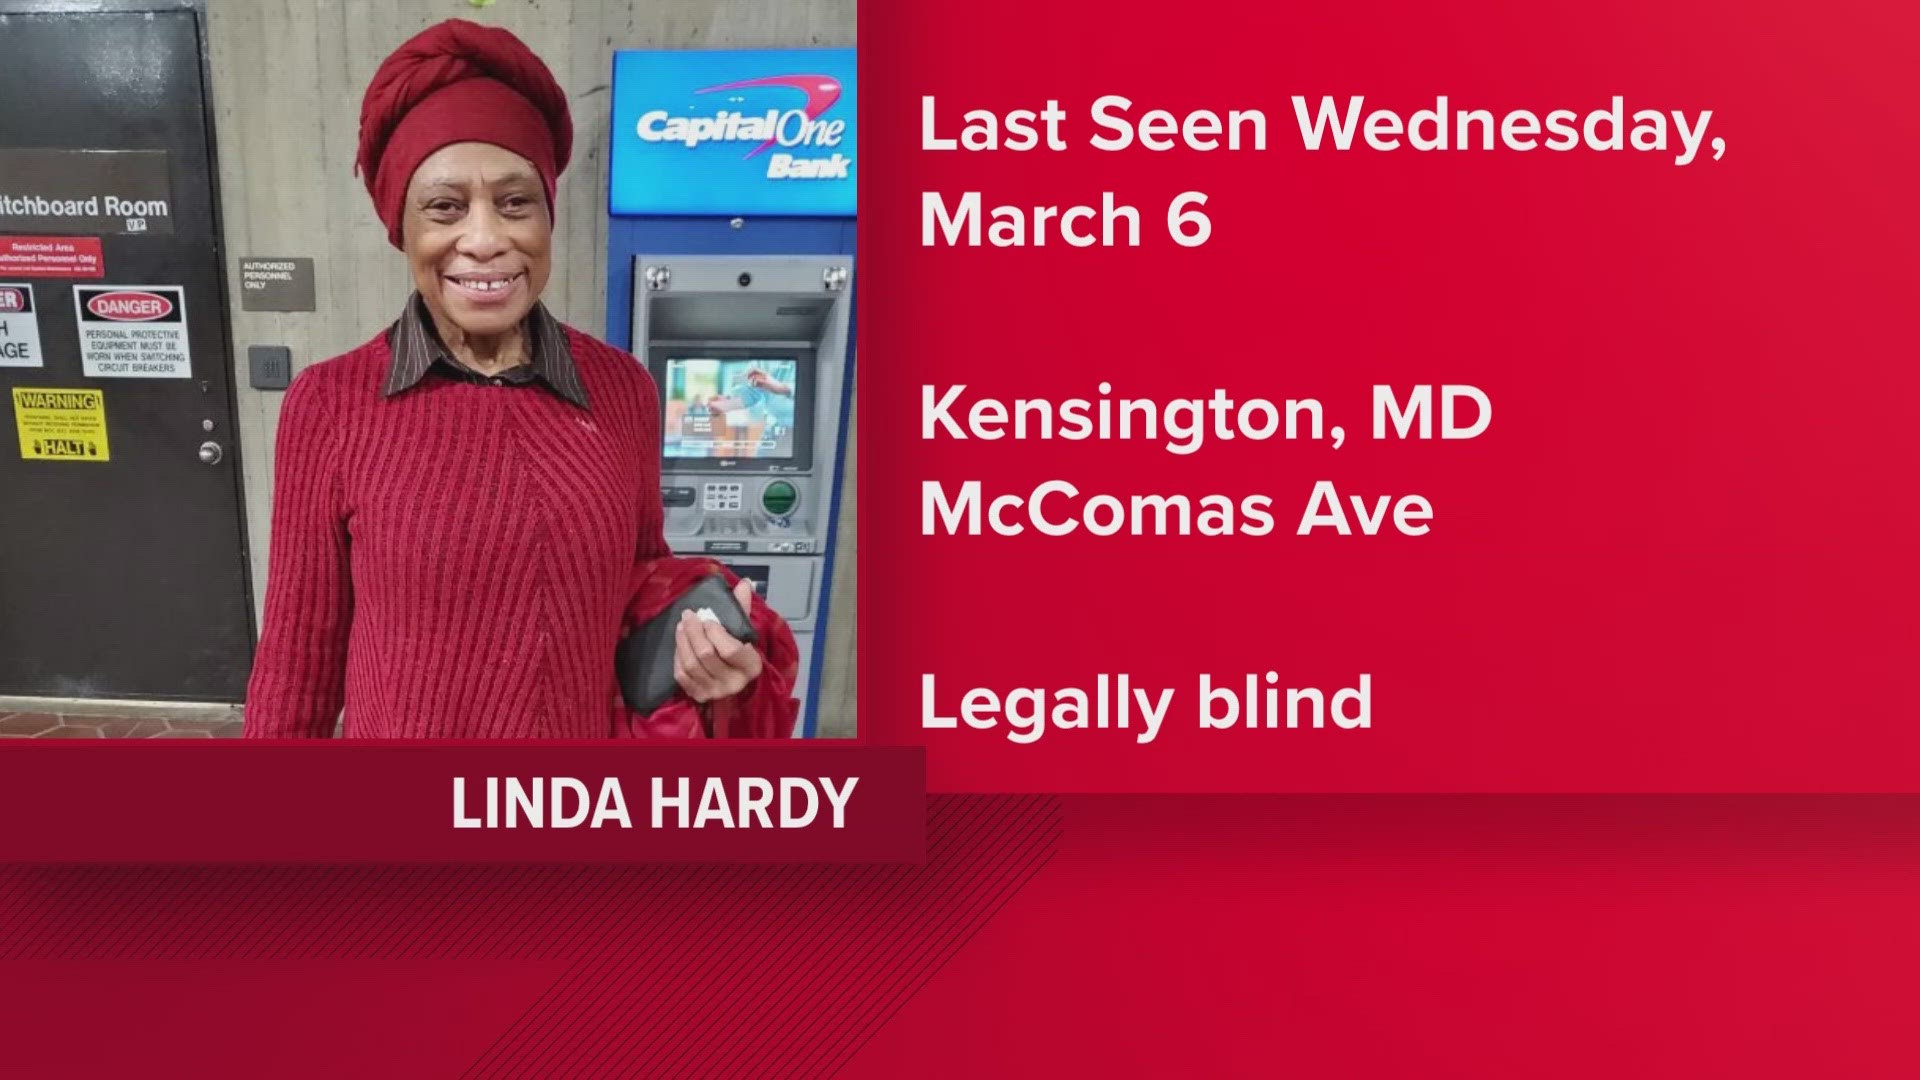 75-year-old Linda Hardy was last seen on Wednesday, March 13.